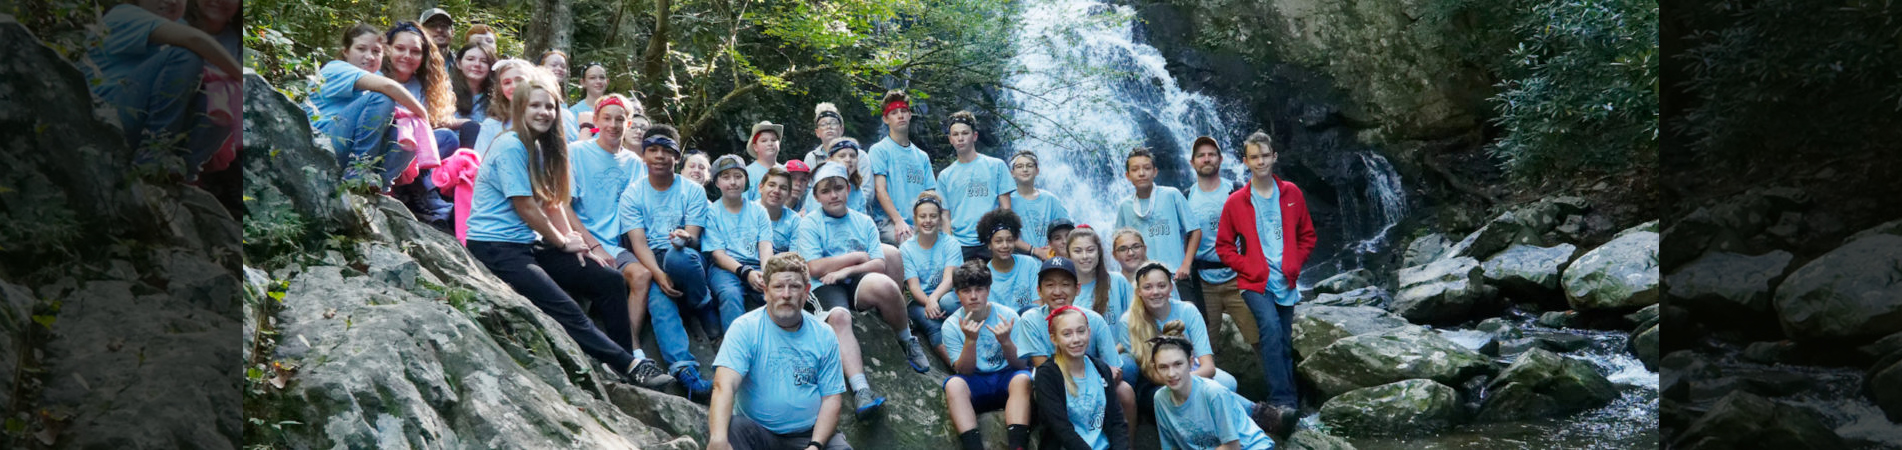 PCS Middle School Class sitting on rocks in front of waterfall at a field trip